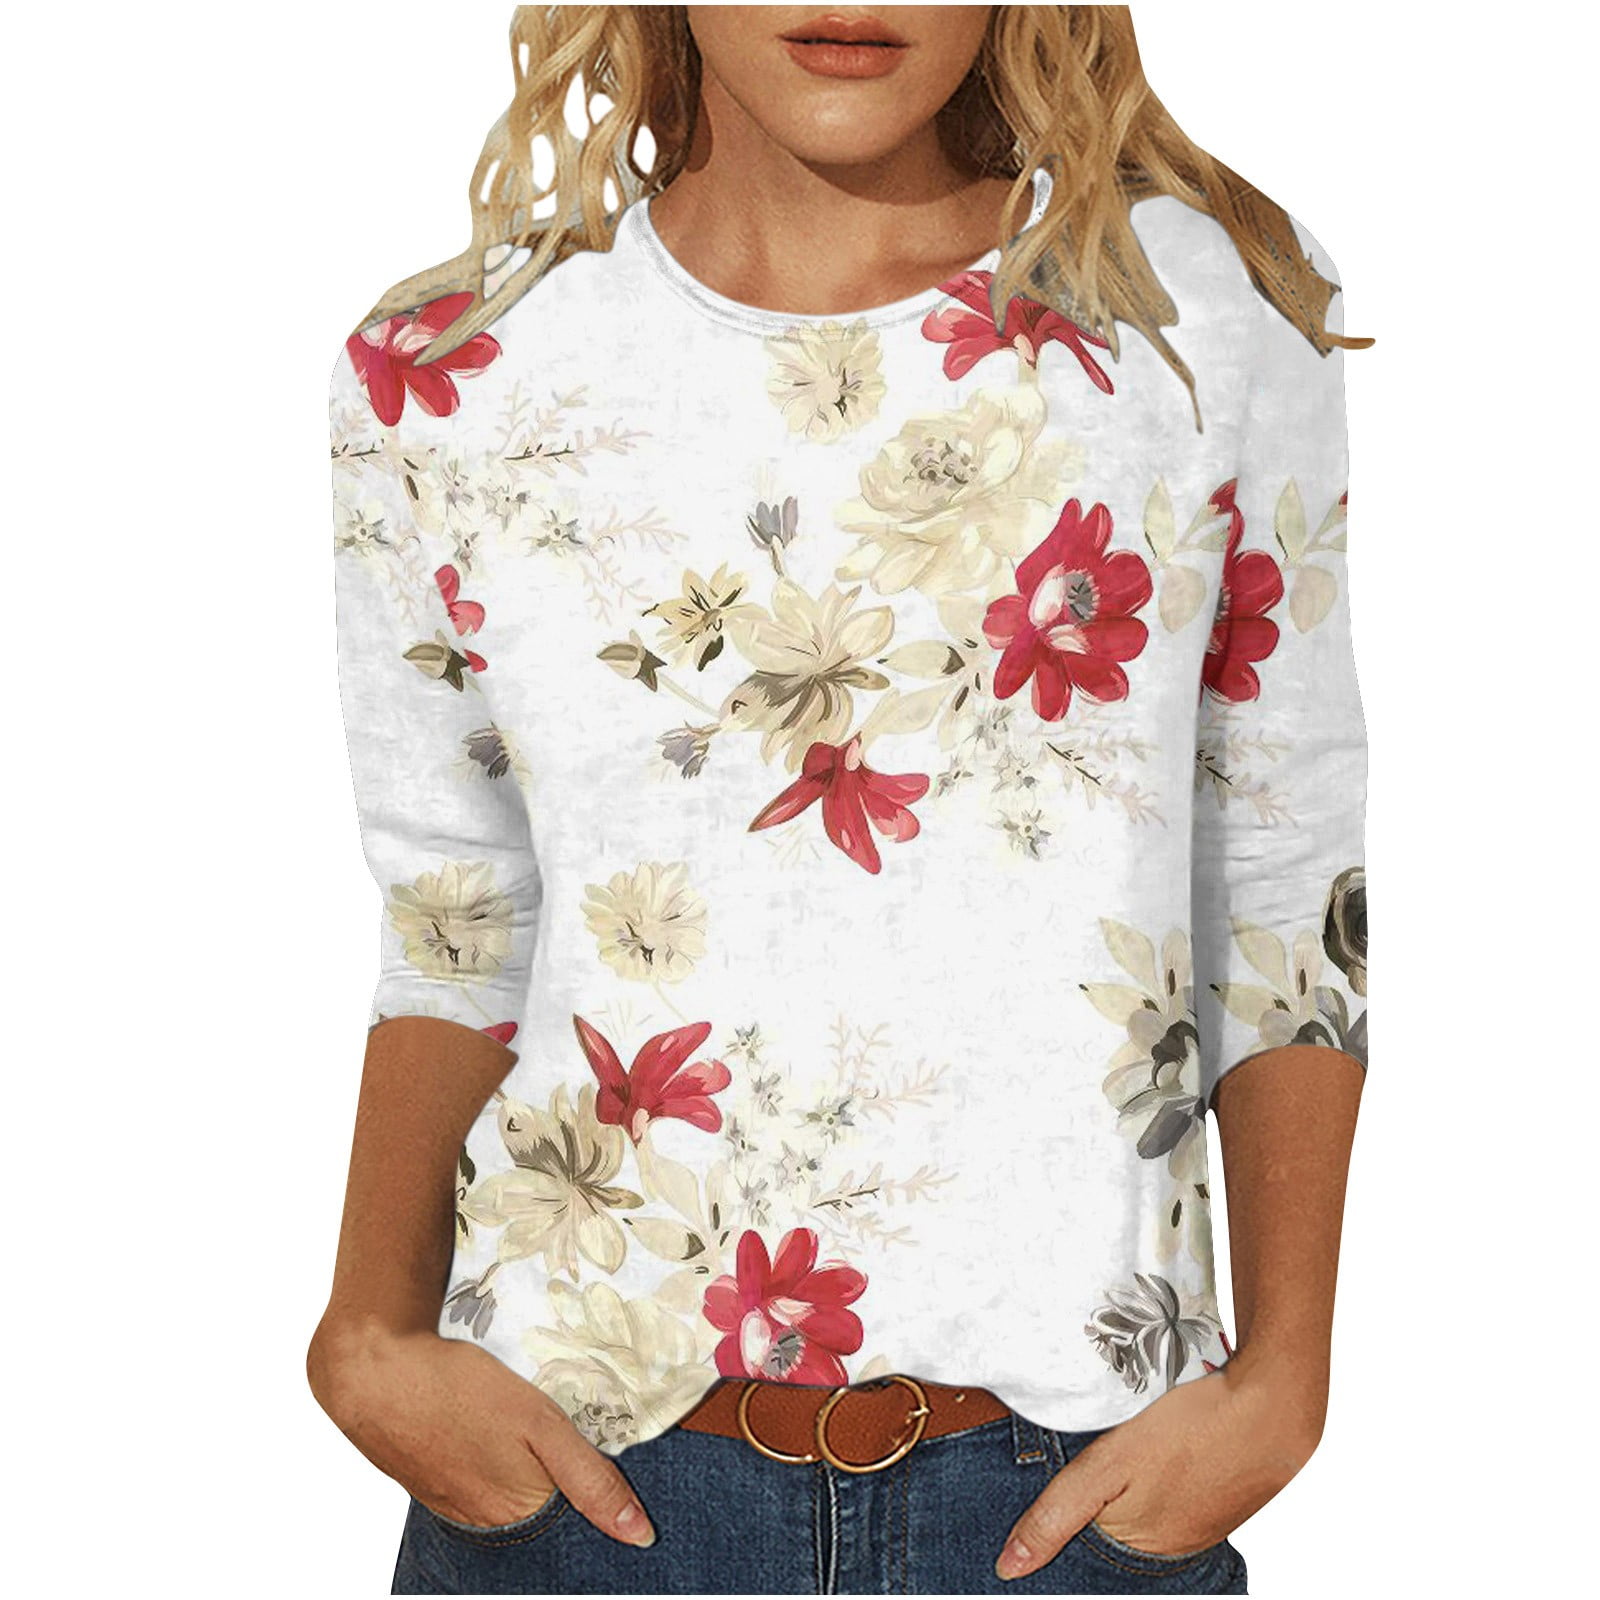 Womens 3/4 Sleeve Summer Tops Fashion Floral Boatneck Top 3/4 Length ...